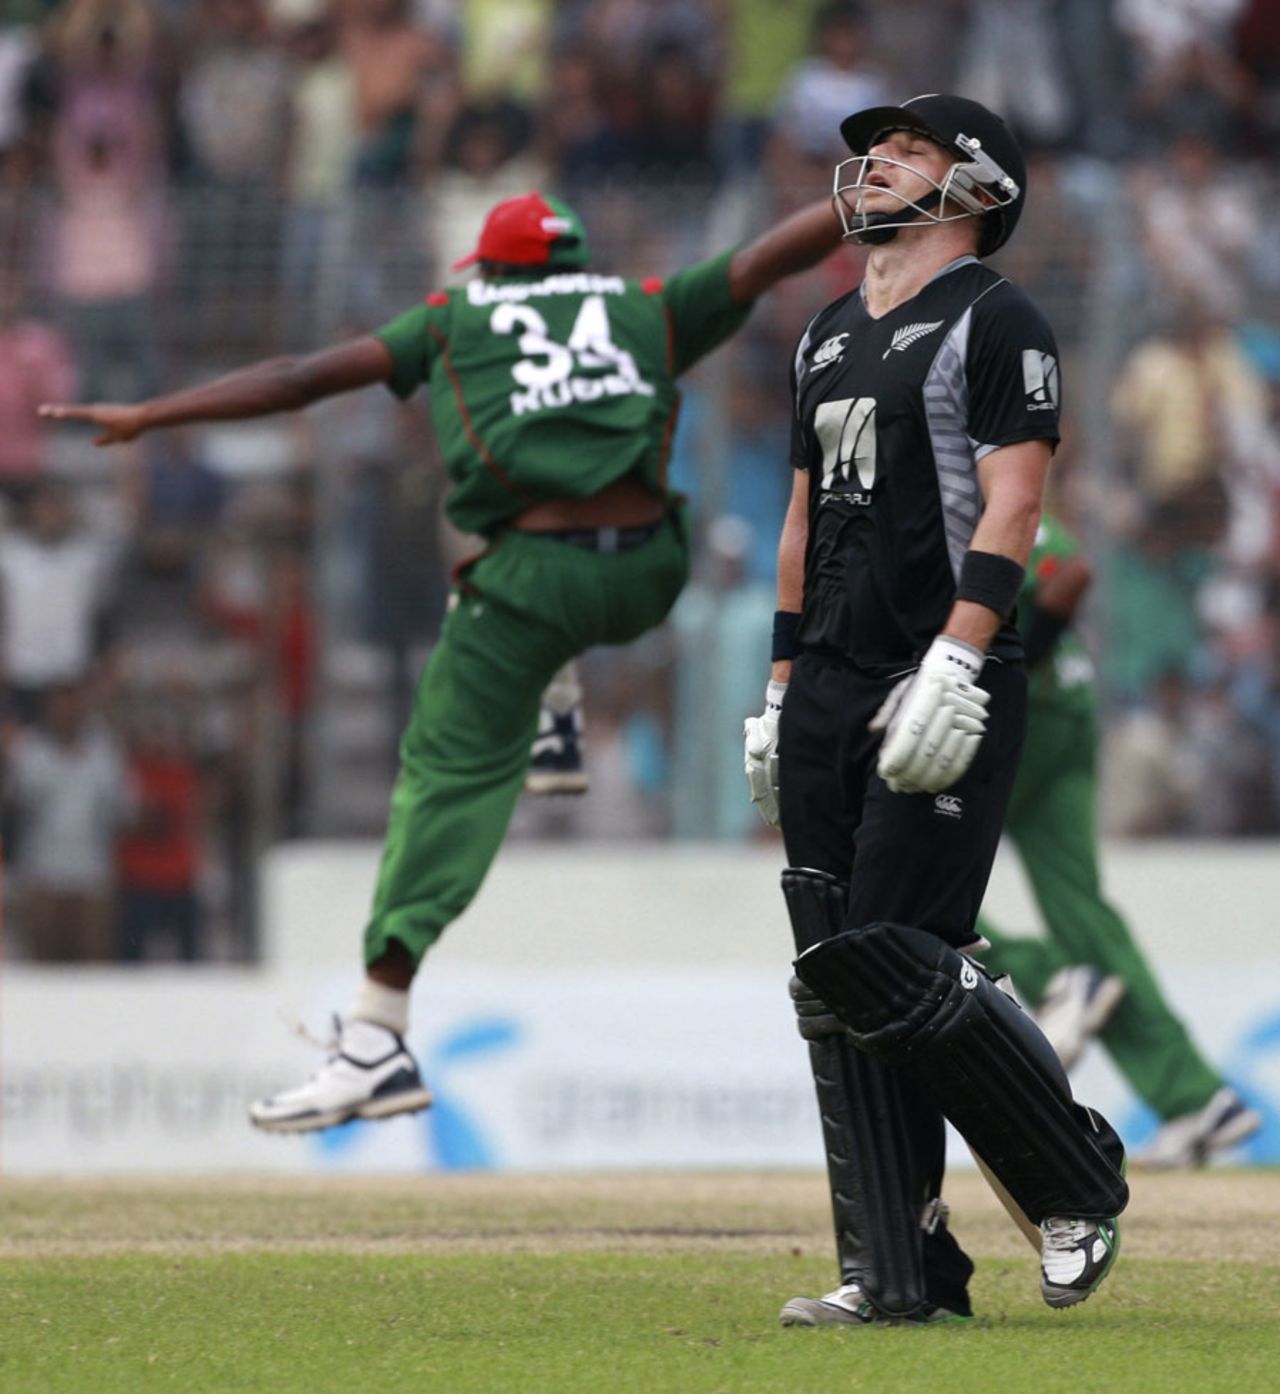 Nathan McCullum is disappointed after being run out, Bangladesh v New Zealand, 4th ODI, Mirpur, October 14, 2010